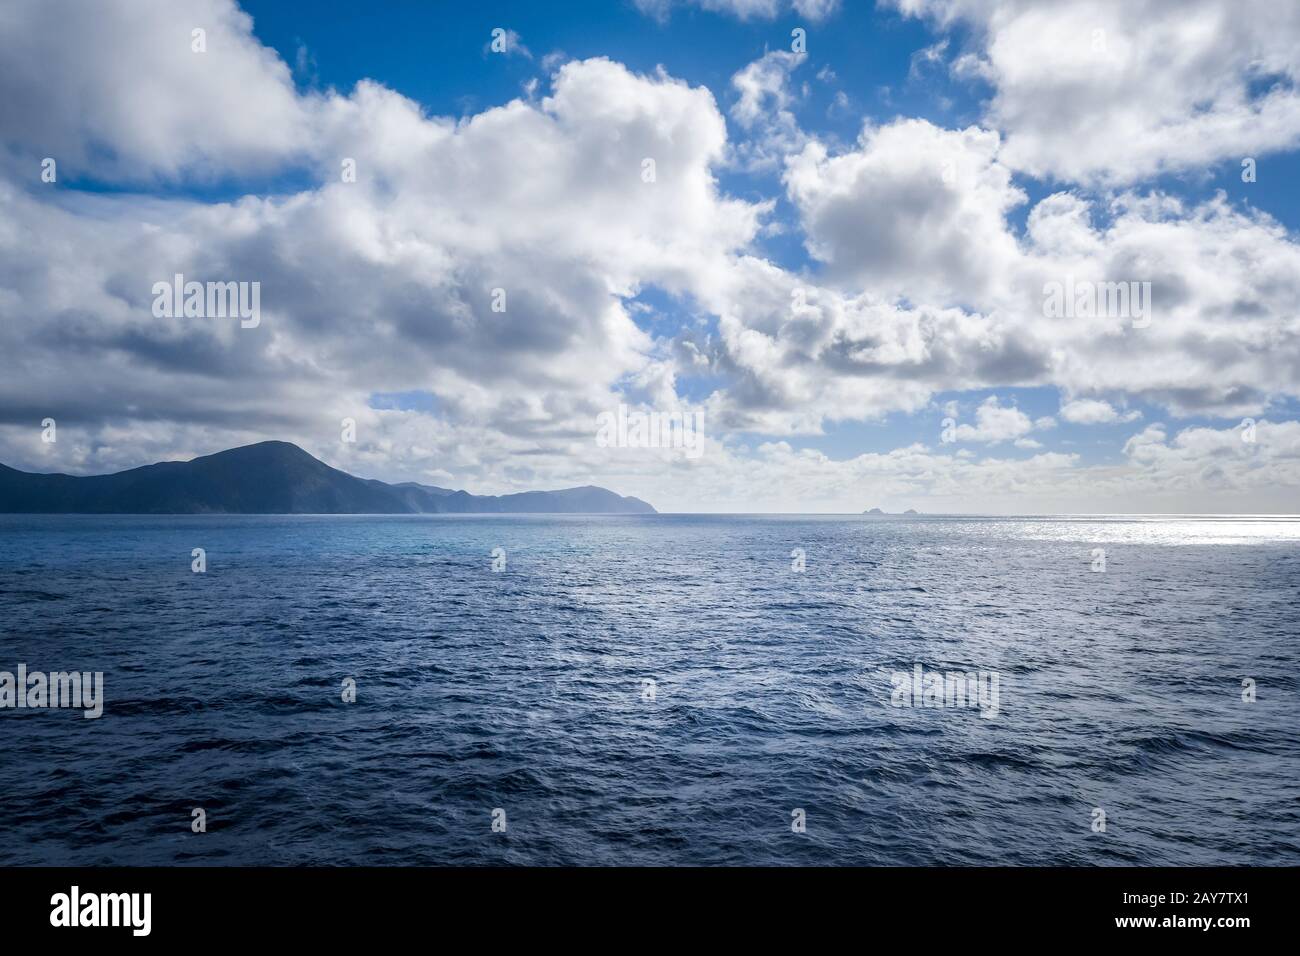 Marlborough Sounds view from a ferry, New Zealand Stock Photo